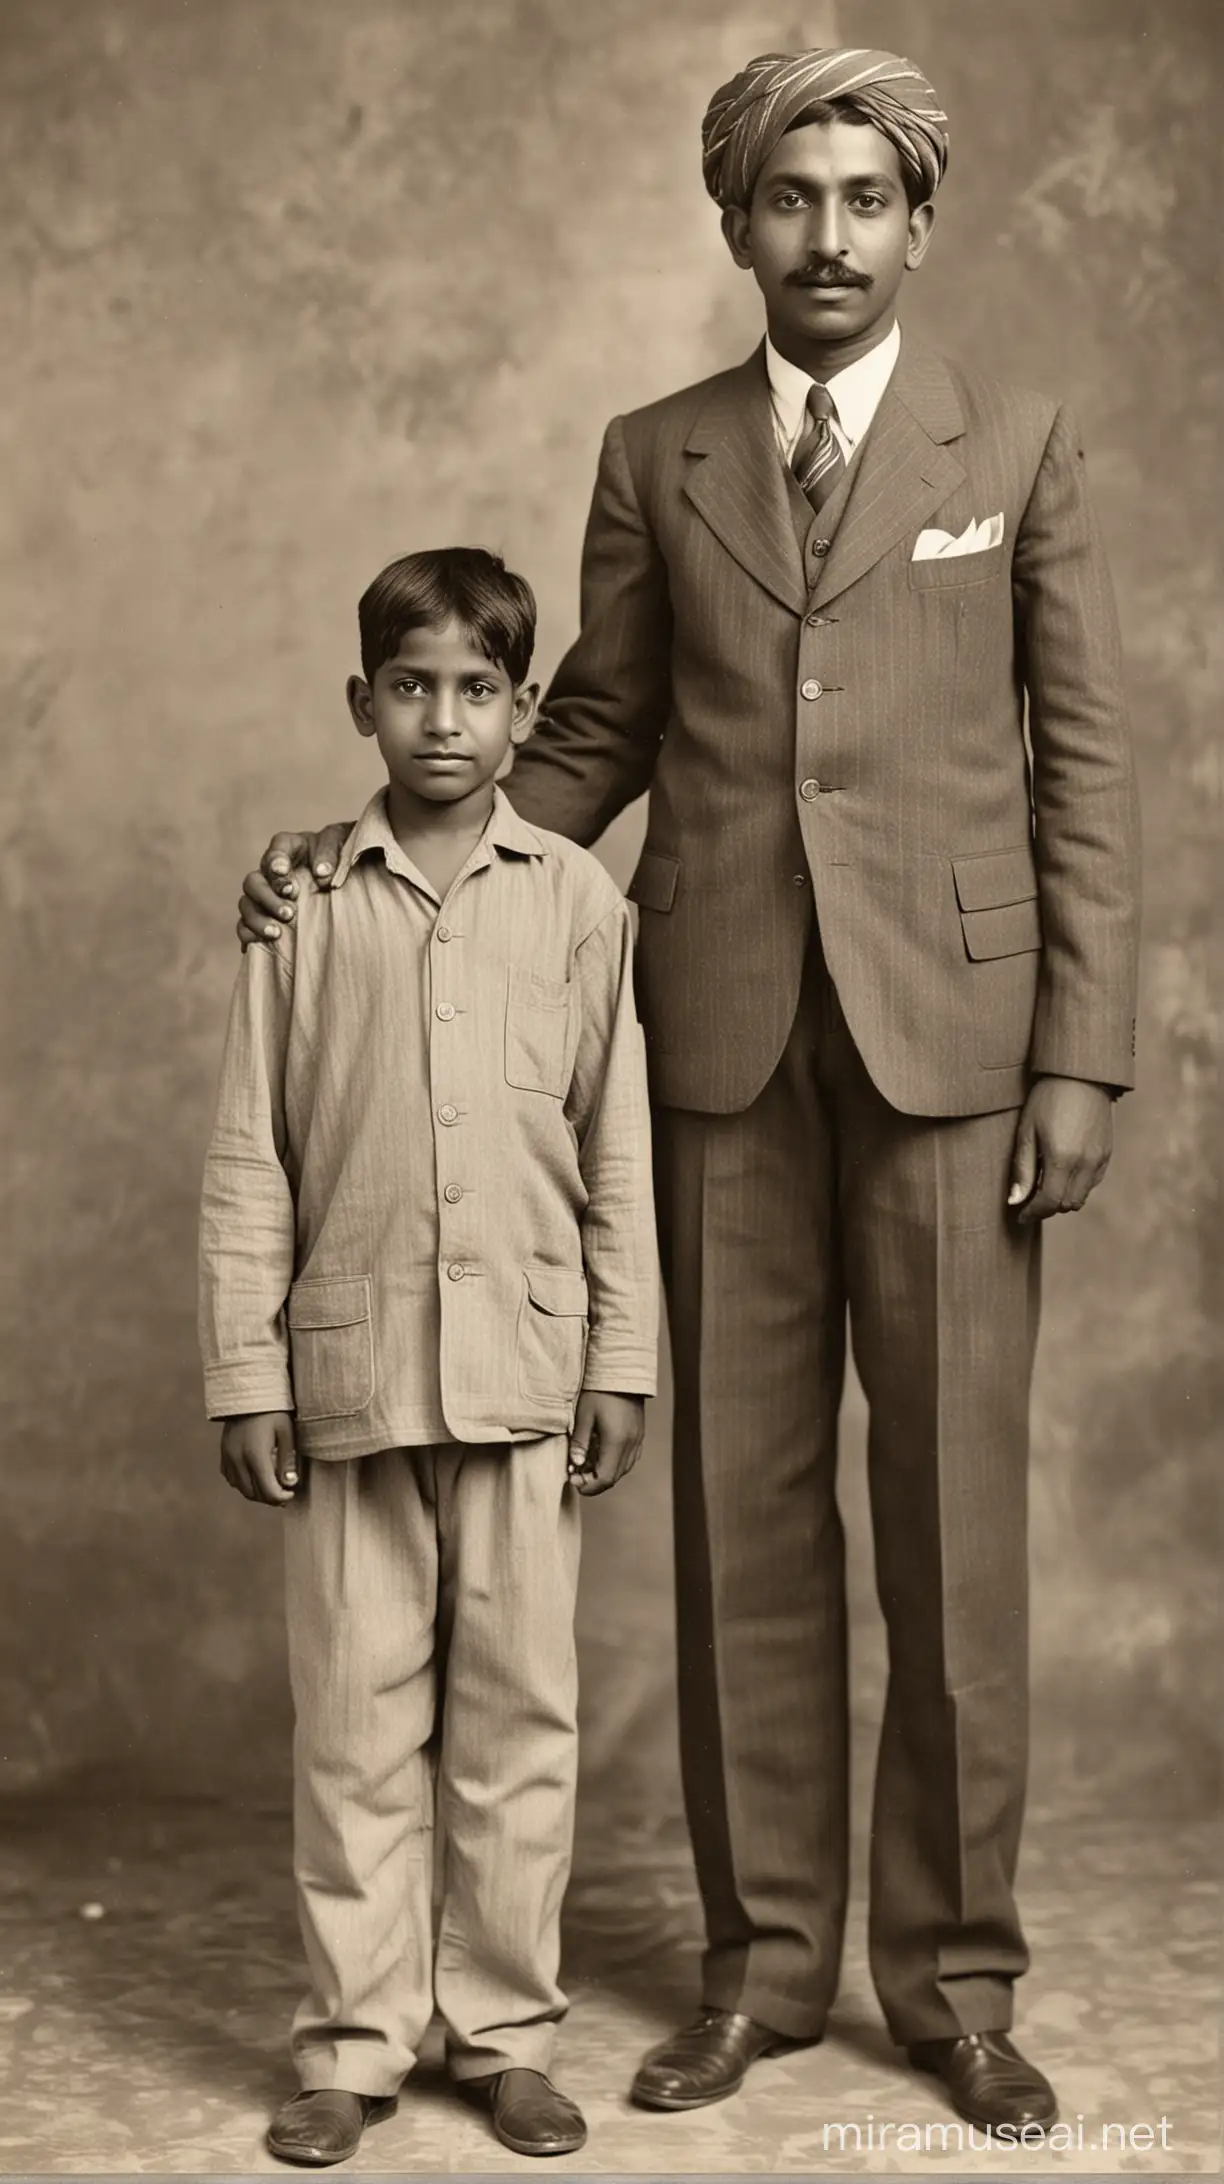 Indian man and his 9 year old son standing in the 1930s